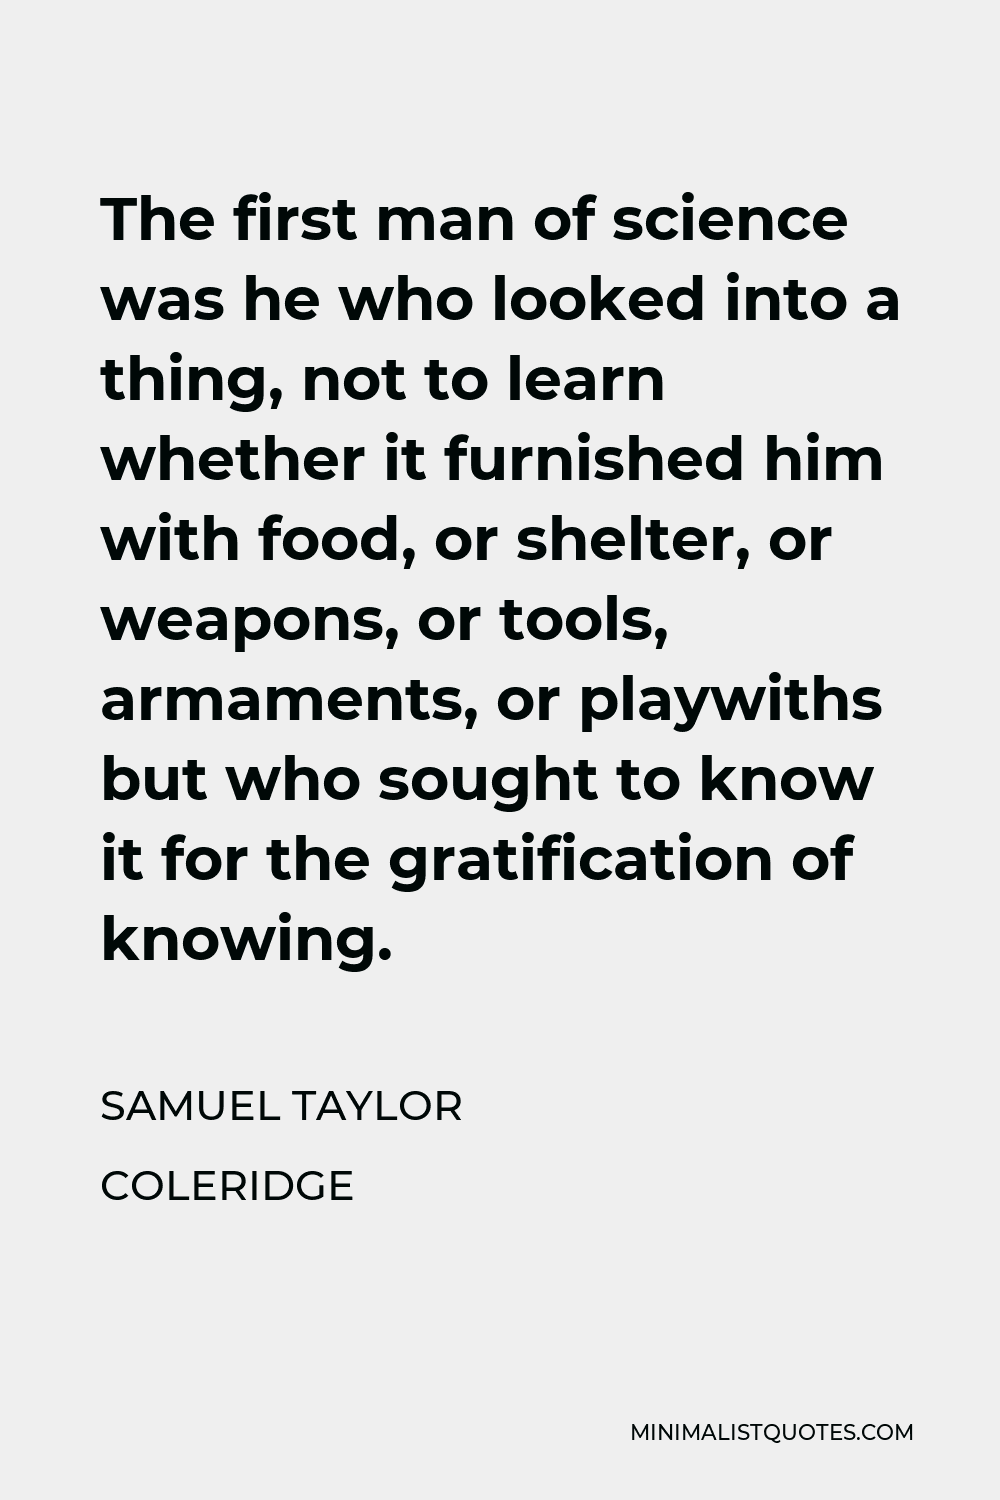 Samuel Taylor Coleridge Quote - The first man of science was he who looked into a thing, not to learn whether it furnished him with food, or shelter, or weapons, or tools, armaments, or playwiths but who sought to know it for the gratification of knowing.